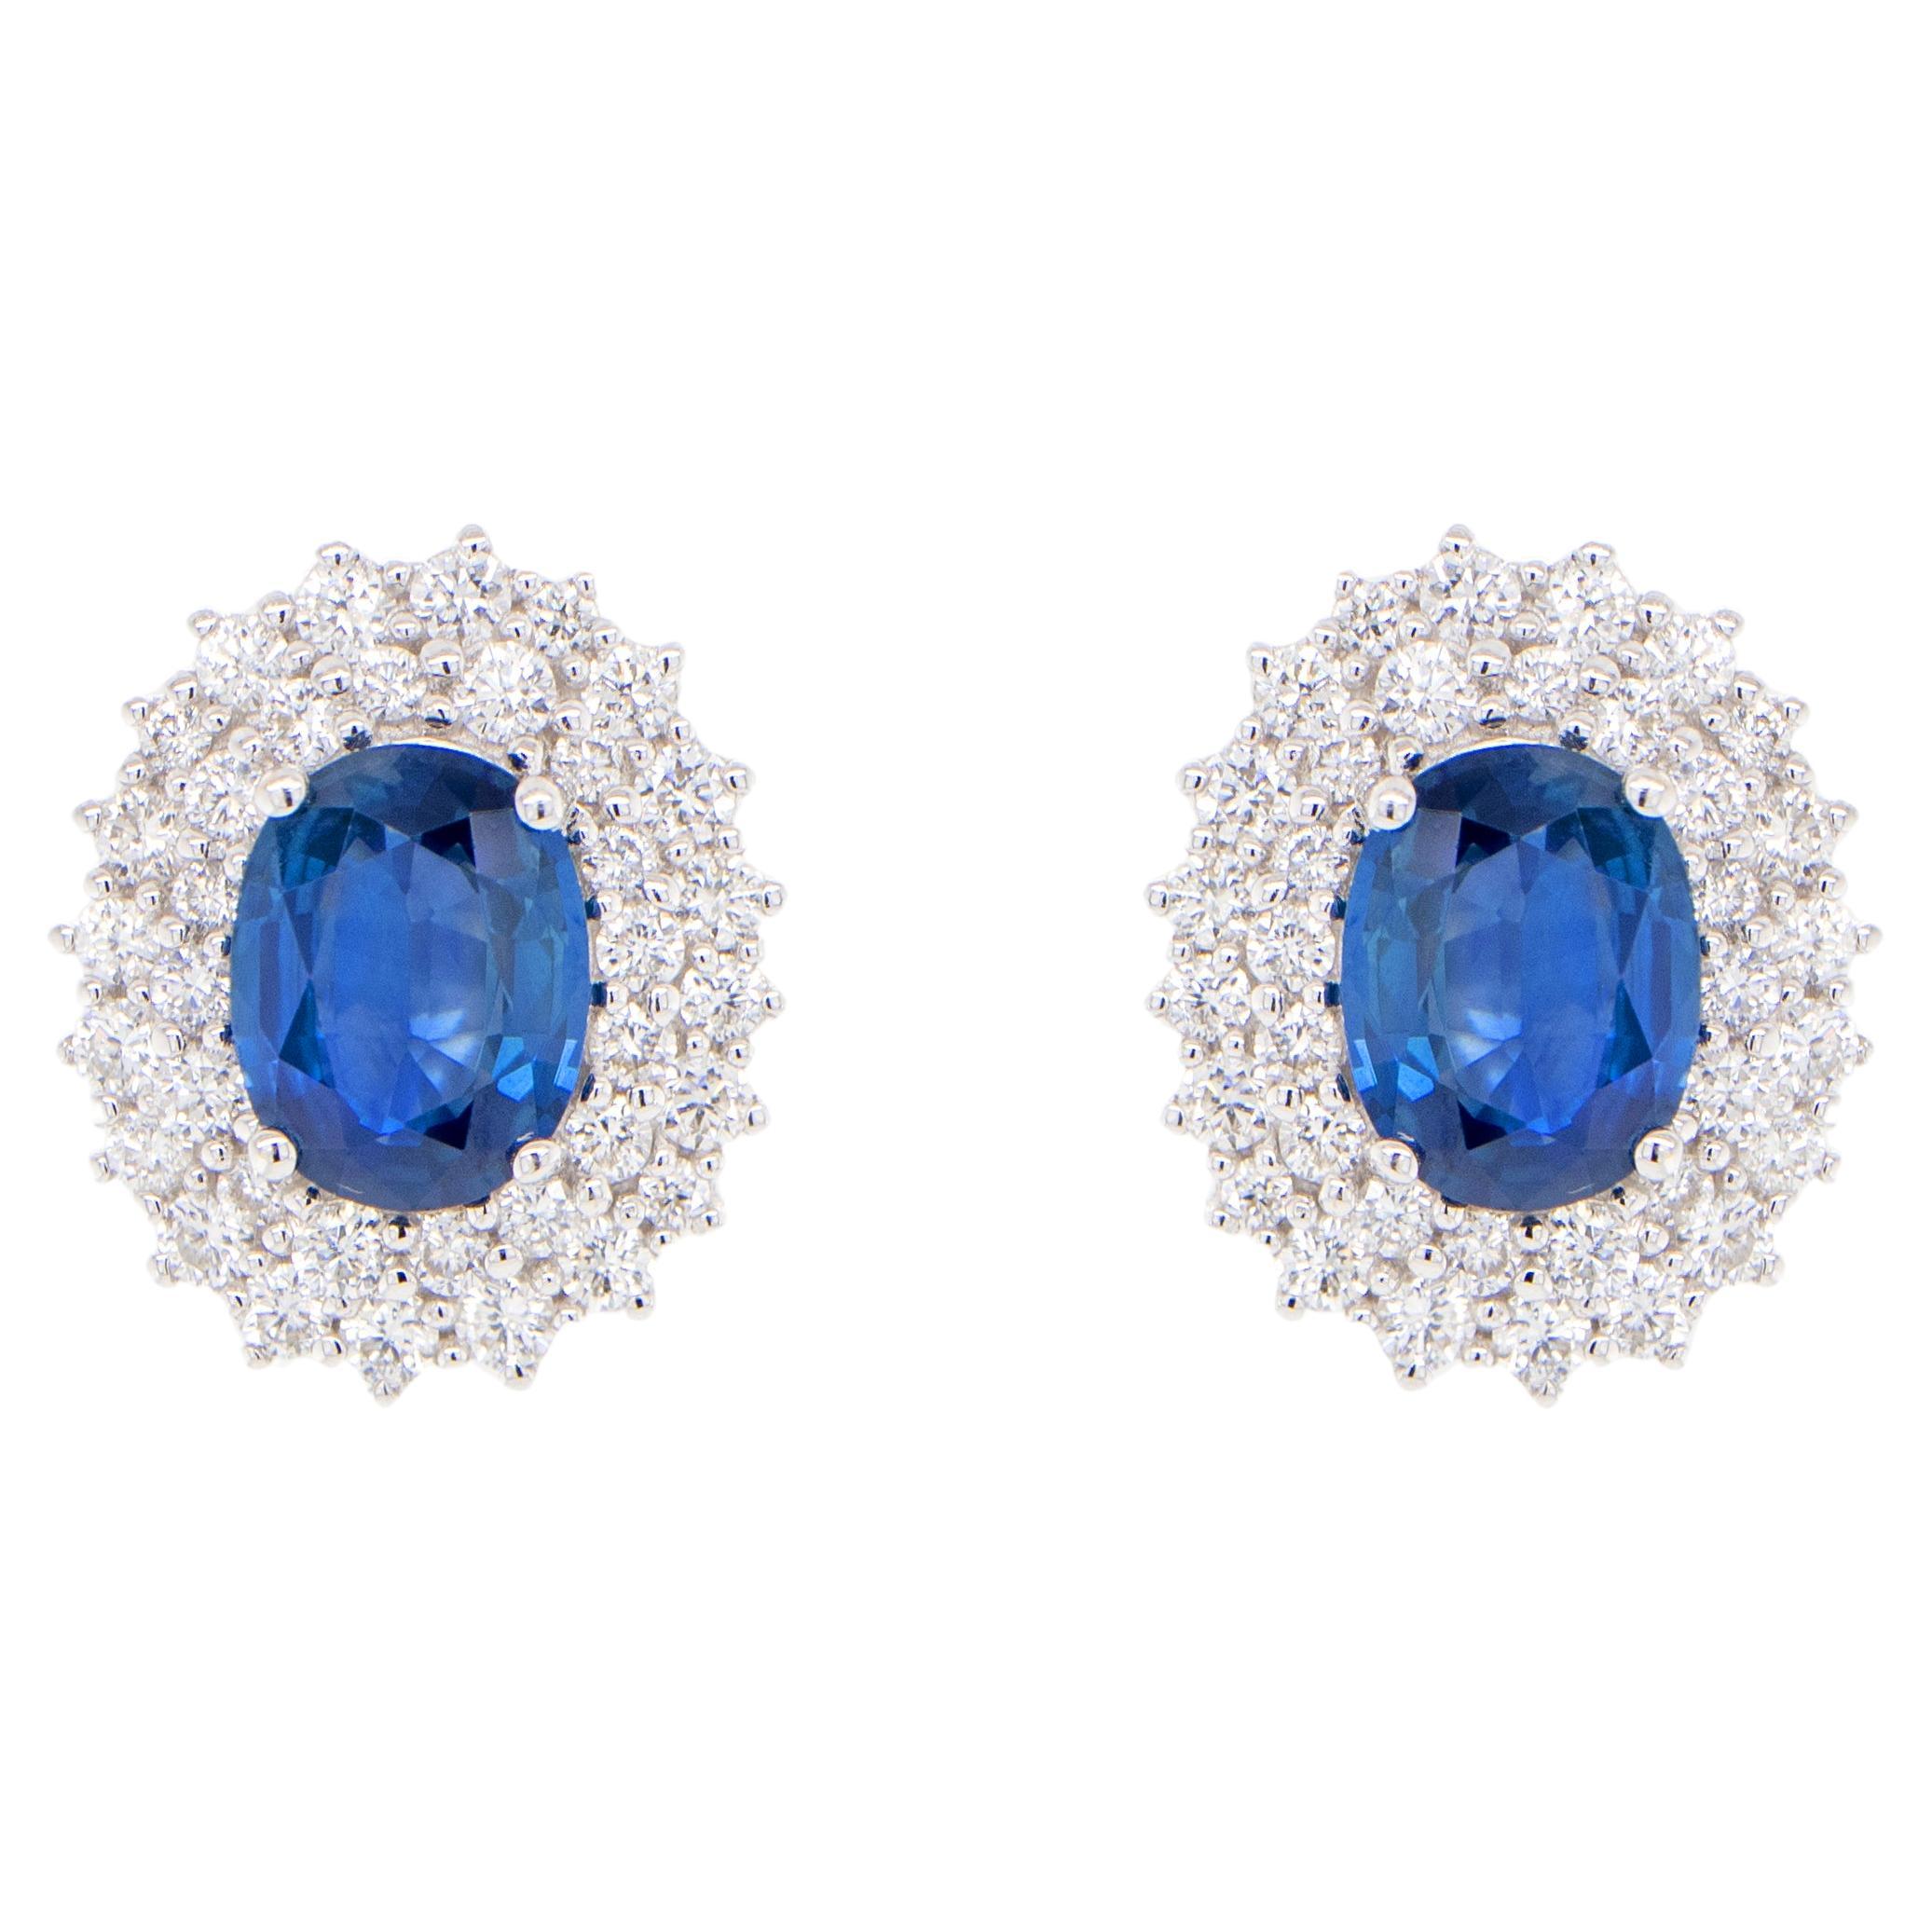 Blue Sapphire Earrings With Diamonds 3.82 Carats 18K Gold For Sale